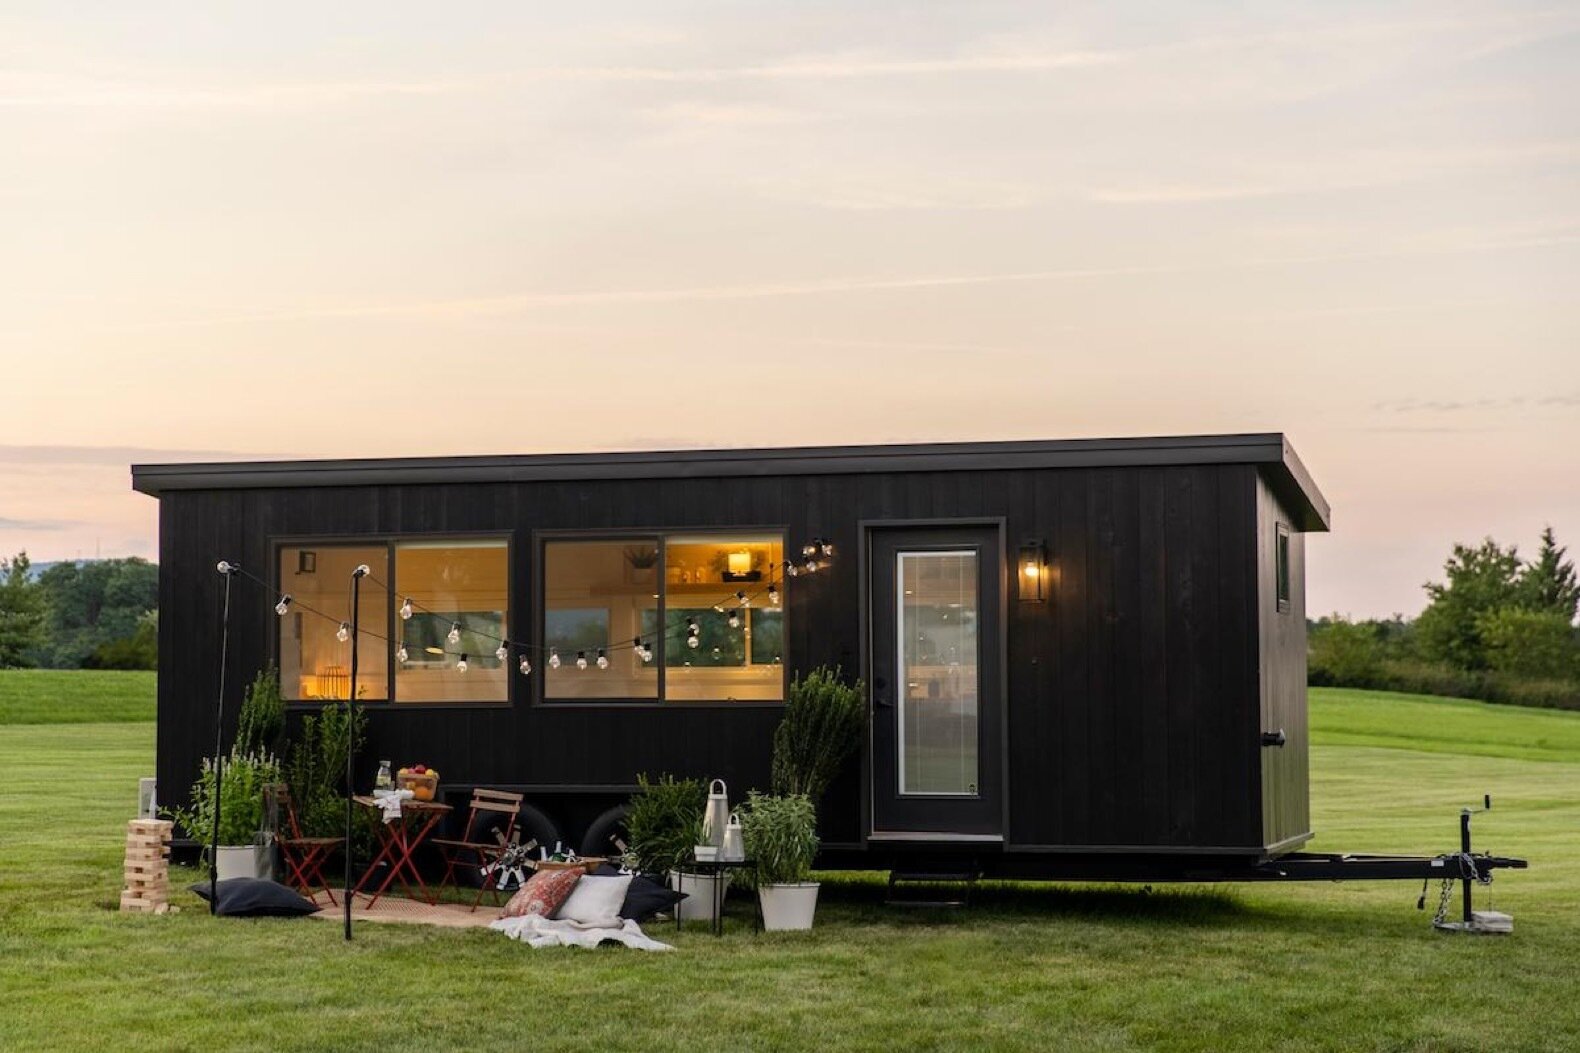  Ikea  Designed a Tiny  Home  With Escape and It s the Most 